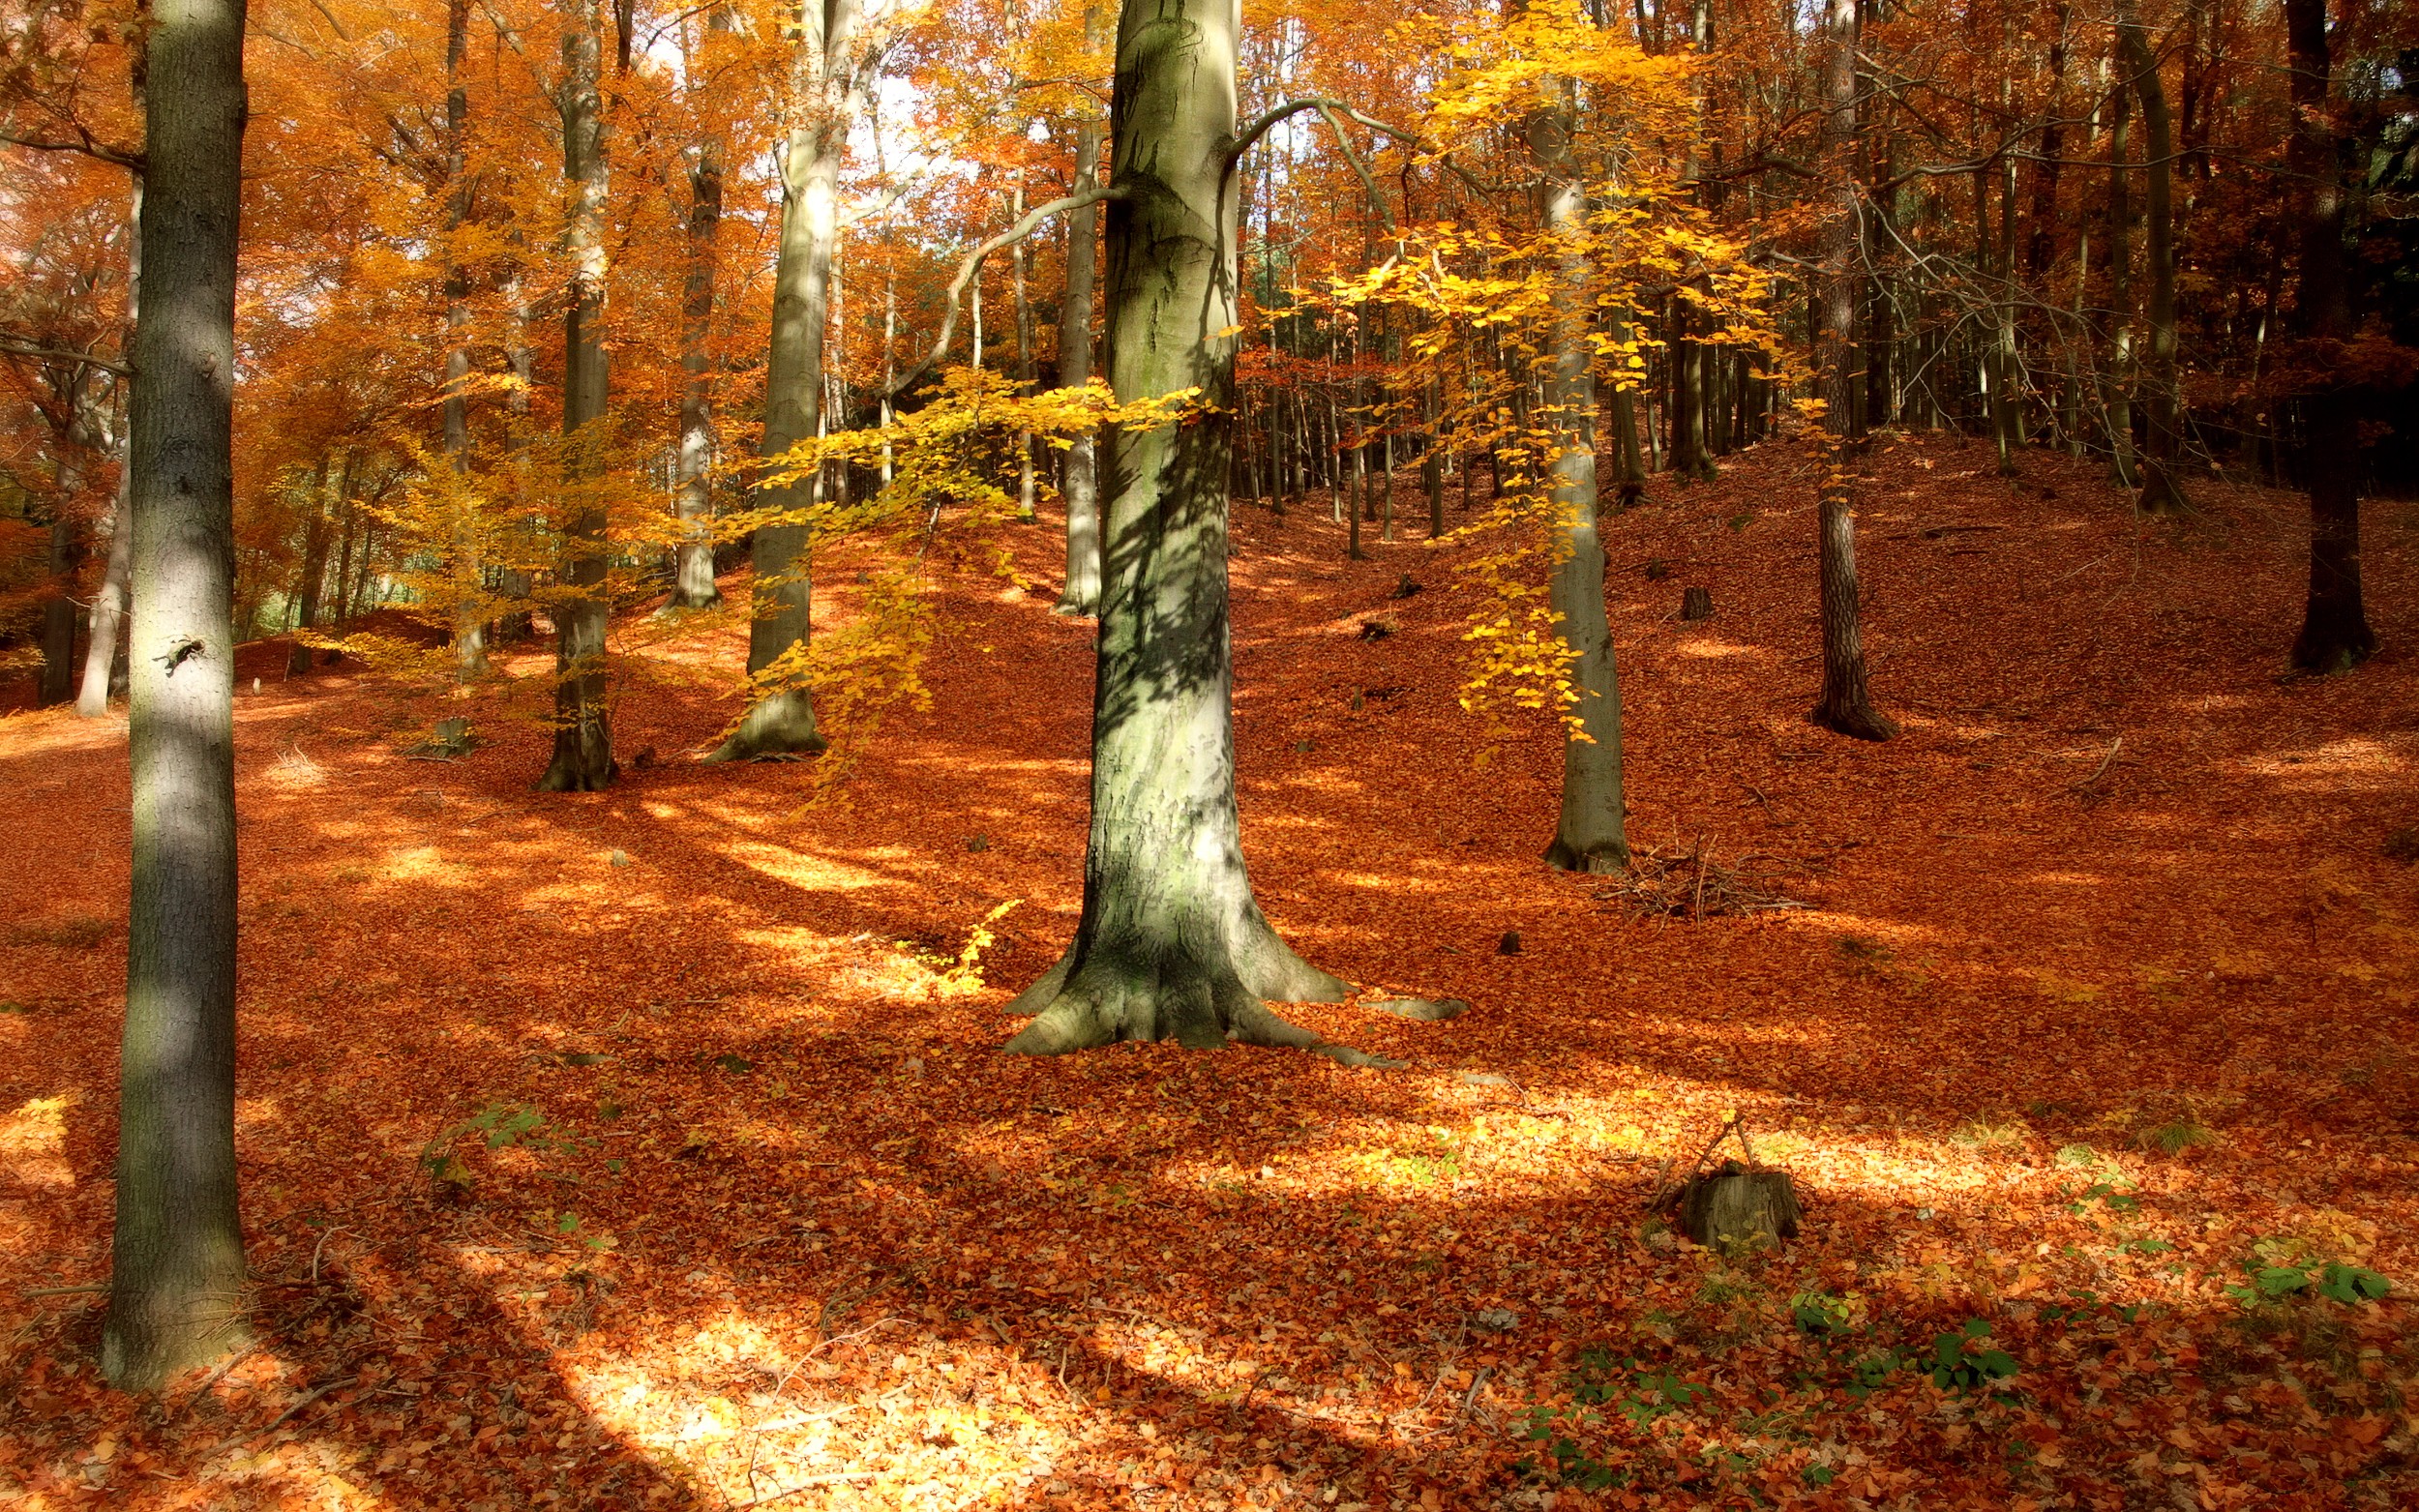 General 2500x1563 park trees fallen leaves red leaves fall forest outdoors leaves plants